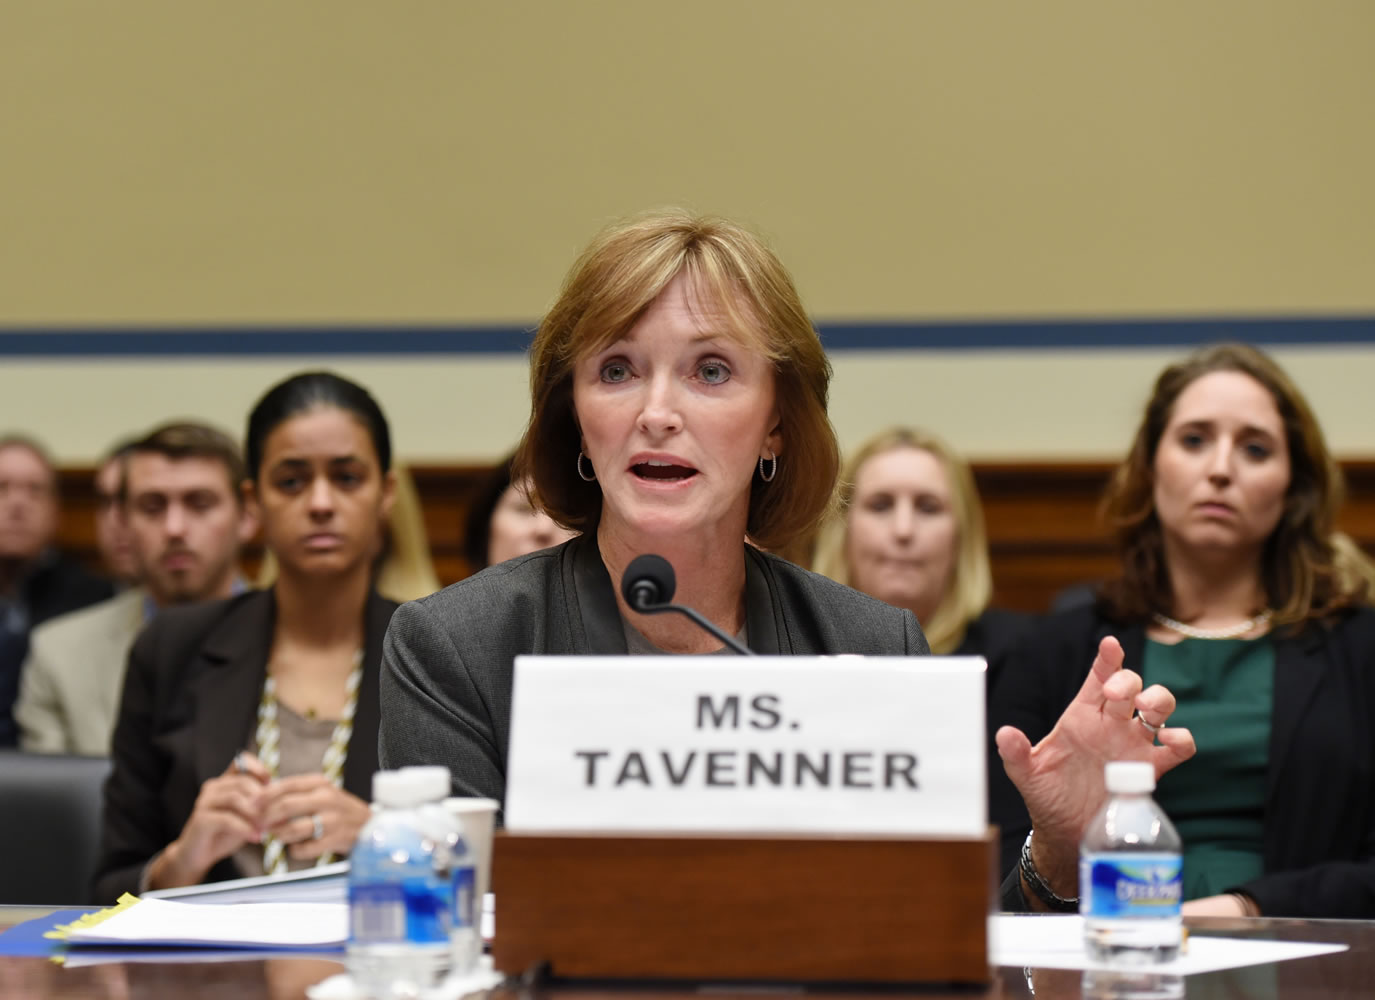 Marilyn Tavenner, the administrator of the Centers for Medicare and Medicaid Services, testifies on Capitol Hill in Washington.